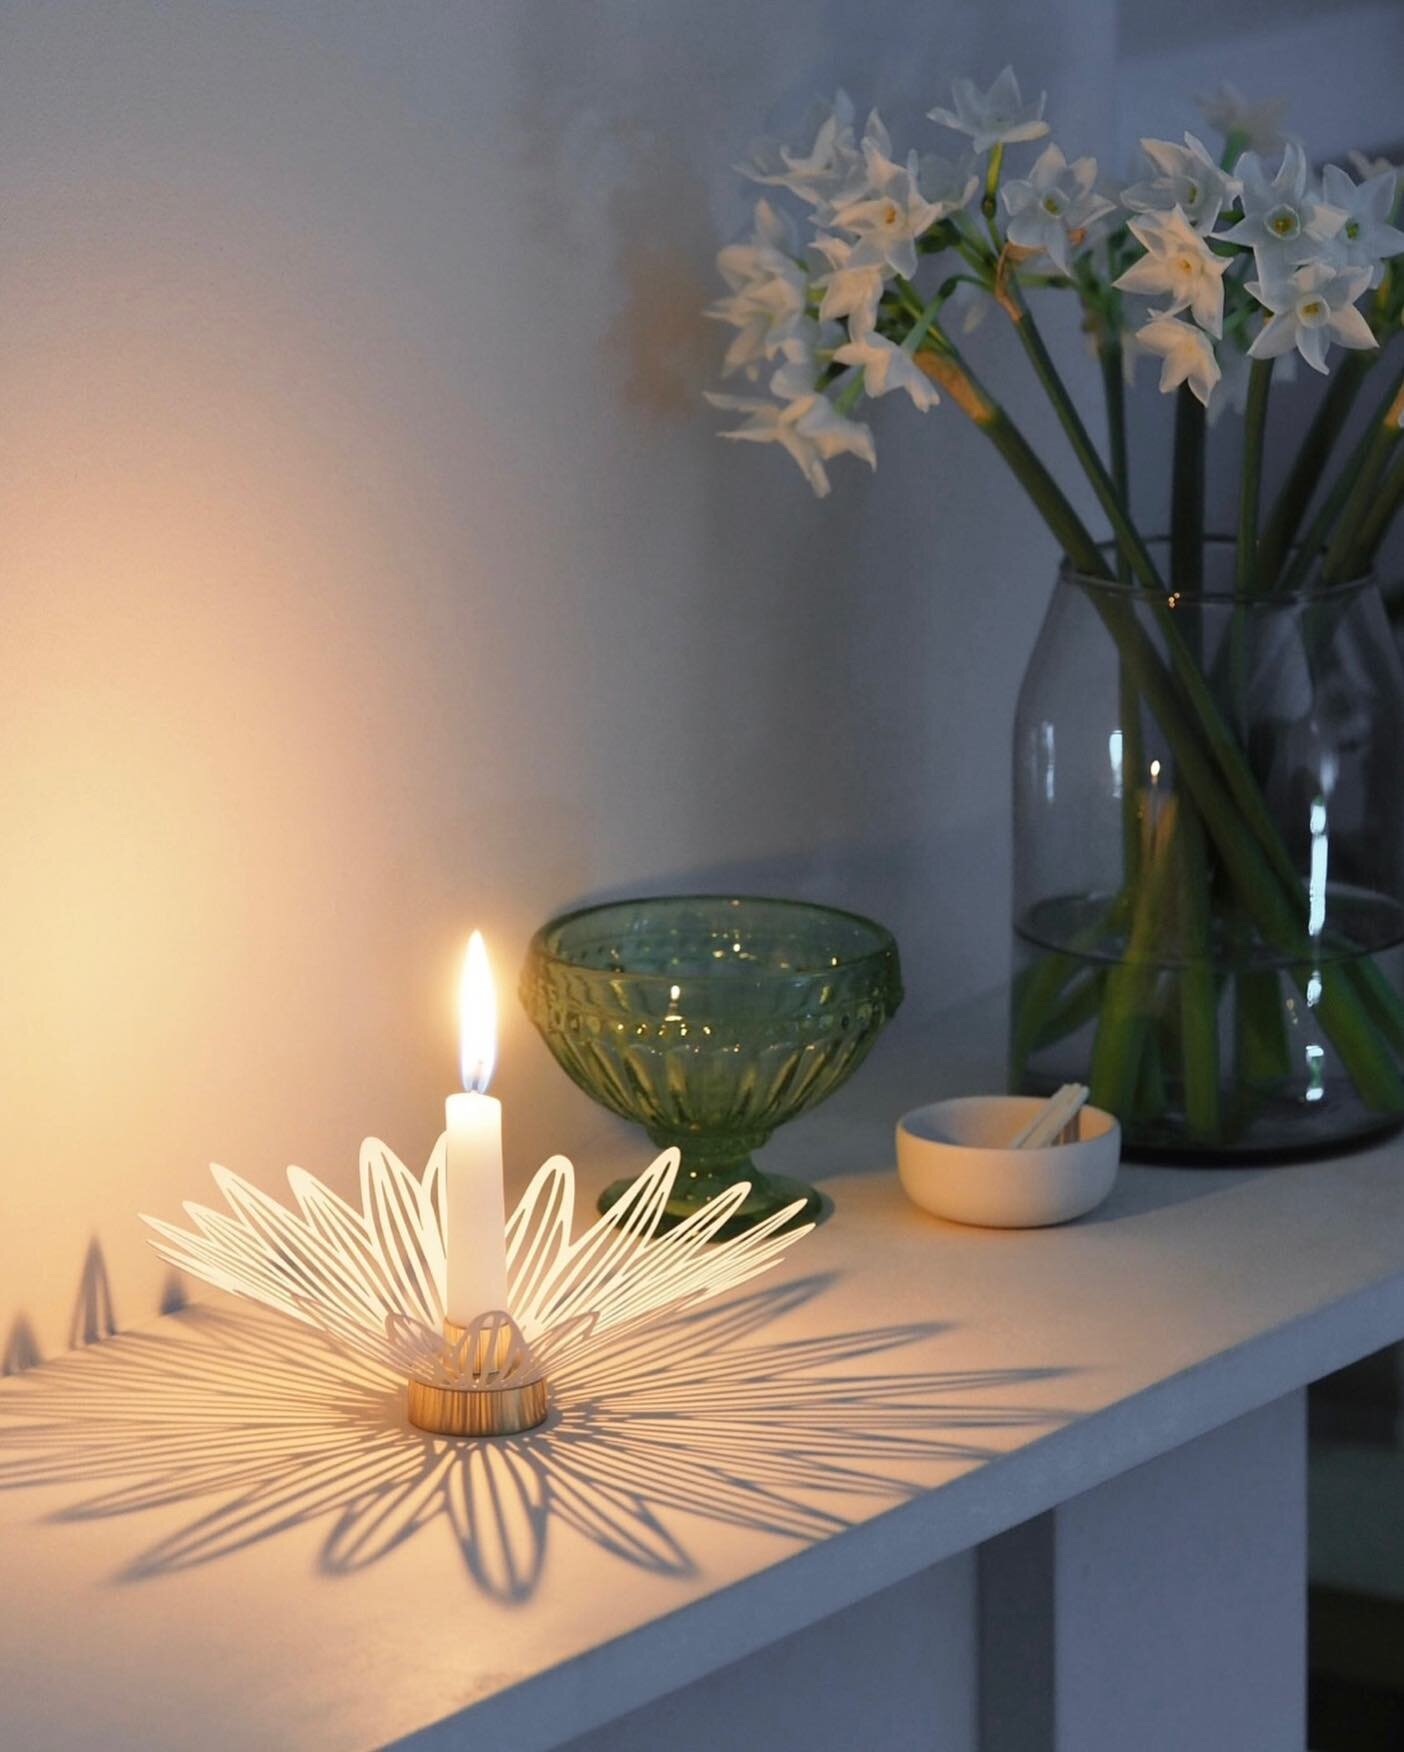 Soft candlelight and shadow patterns on the mantlepiece, and paperwhites from our local florist - a little treat to myself.

I hope you&rsquo;ve had a good start to the week.

Shadow Series candle holders and hand-dipped candles available from alicei